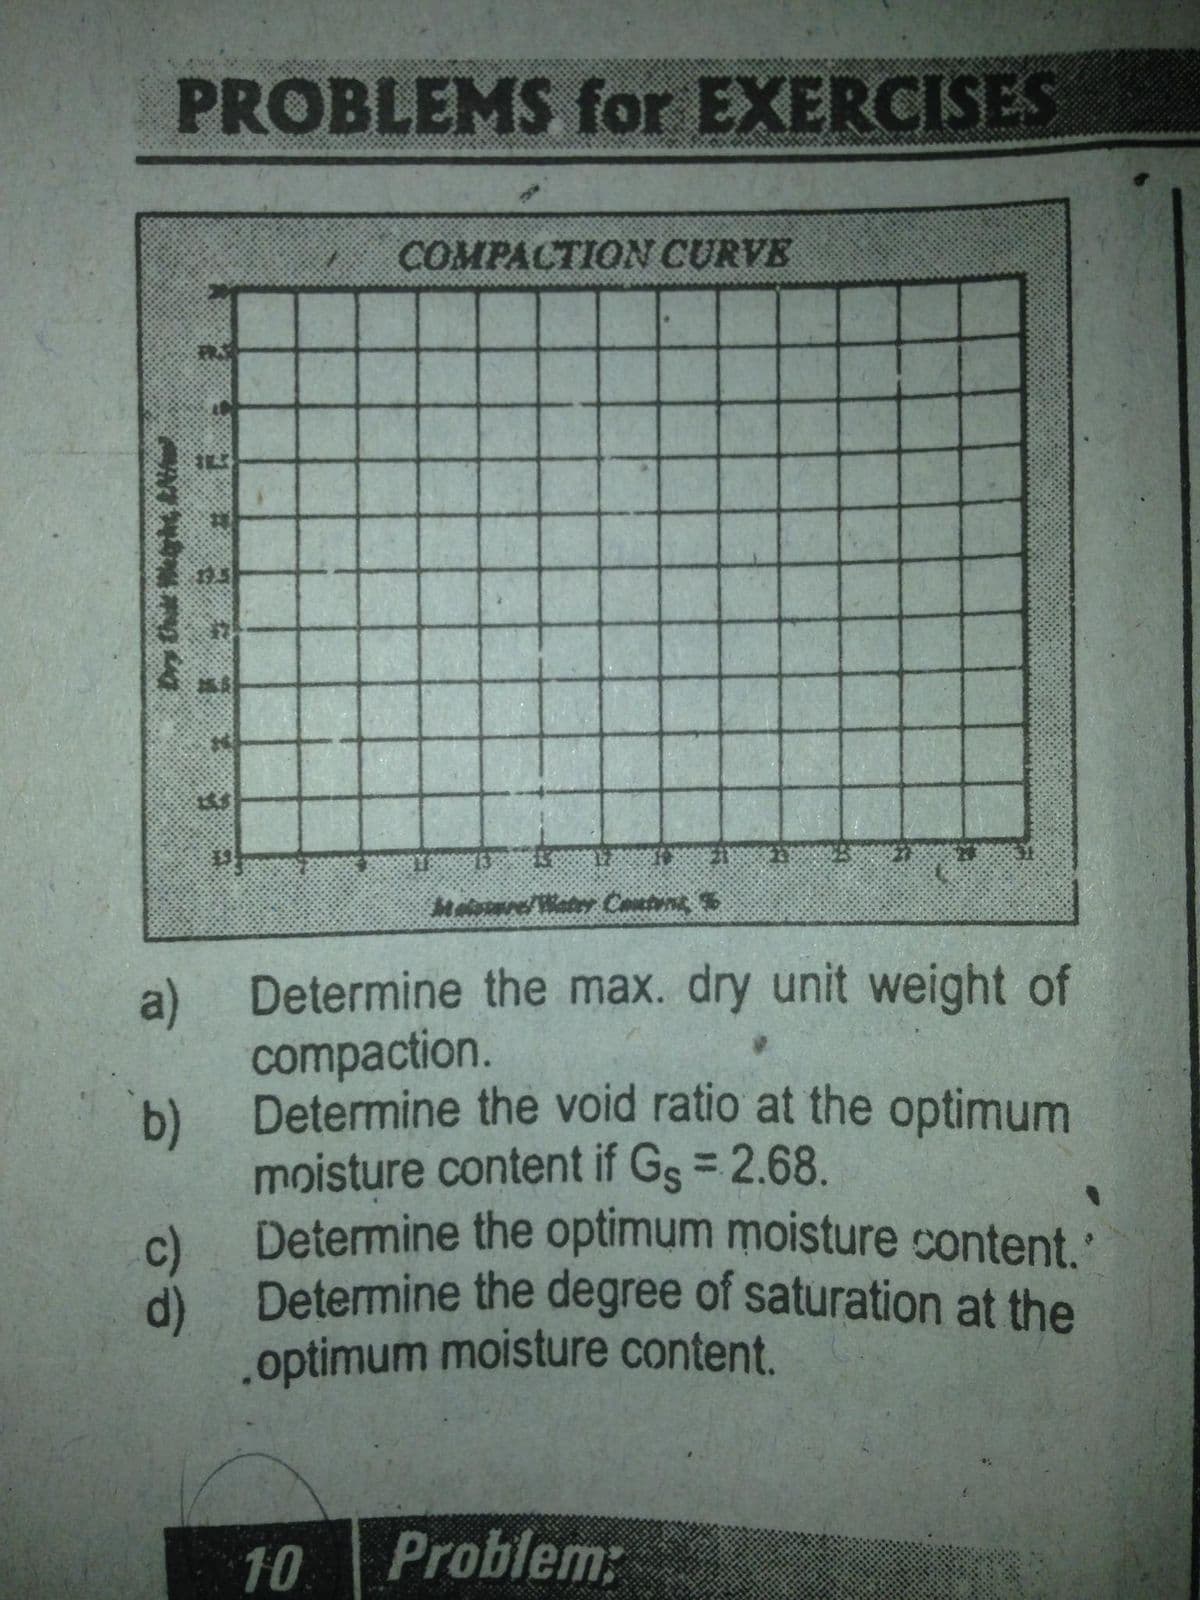 PROBLEMS for EXERCISES
COMPACTION CURVE
Malare Waty Contna $
a) Determine the max. dry unit weight of
compaction.
b) Determine the void ratio at the optimum
moisture content if Gs = 2.68.
c) Determine the optimum moisture content.
d) Determine the degree of saturation at the
.optimum moisture content.
%3D
10
Problem:
